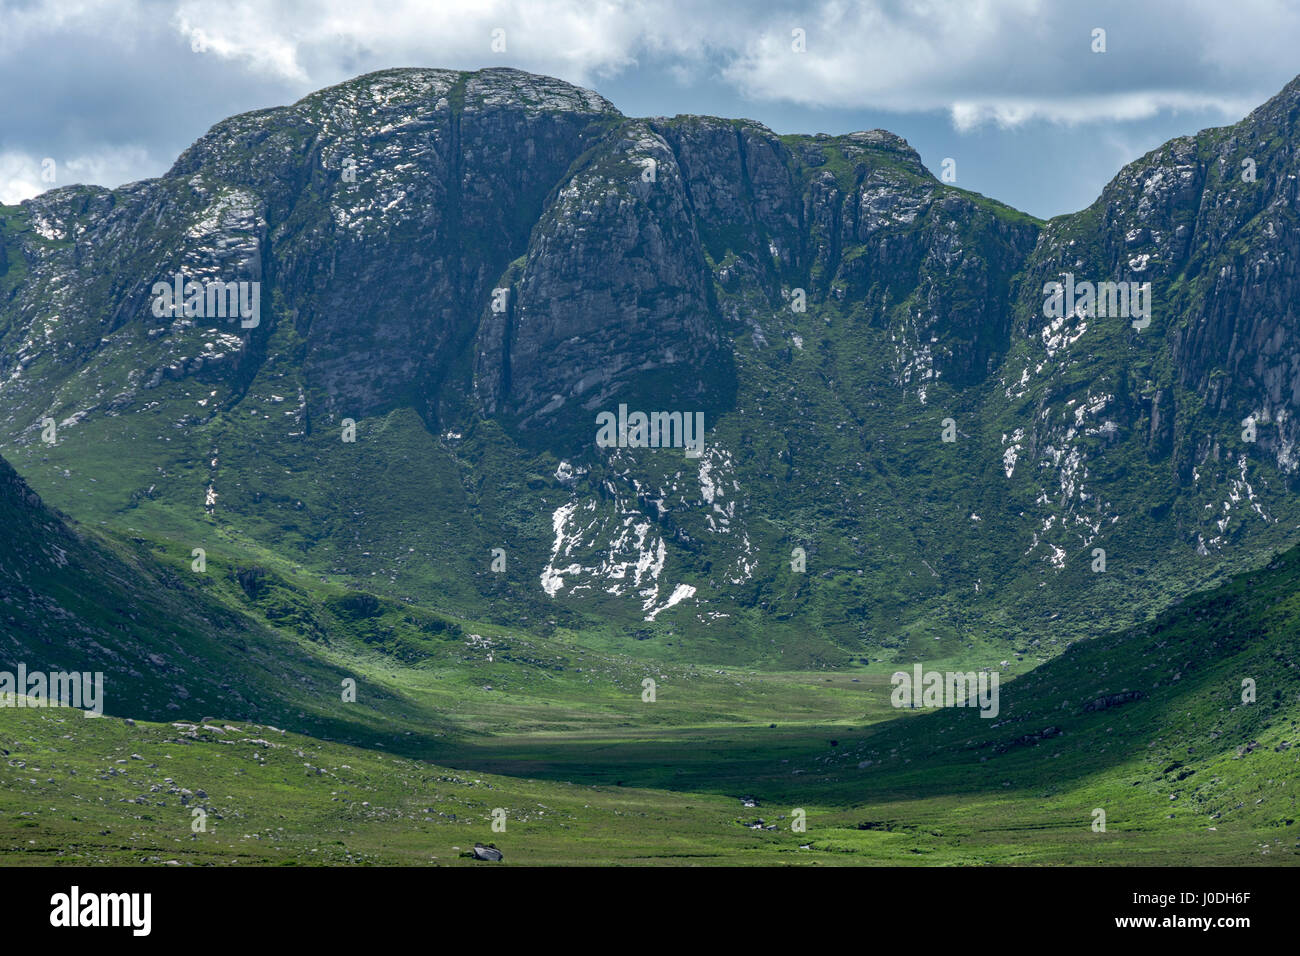 The peak of Crockfadda and the Poisoned Glen, in the Derryveagh Mountains near Dunlewy, County Donegal, Ireland Stock Photo